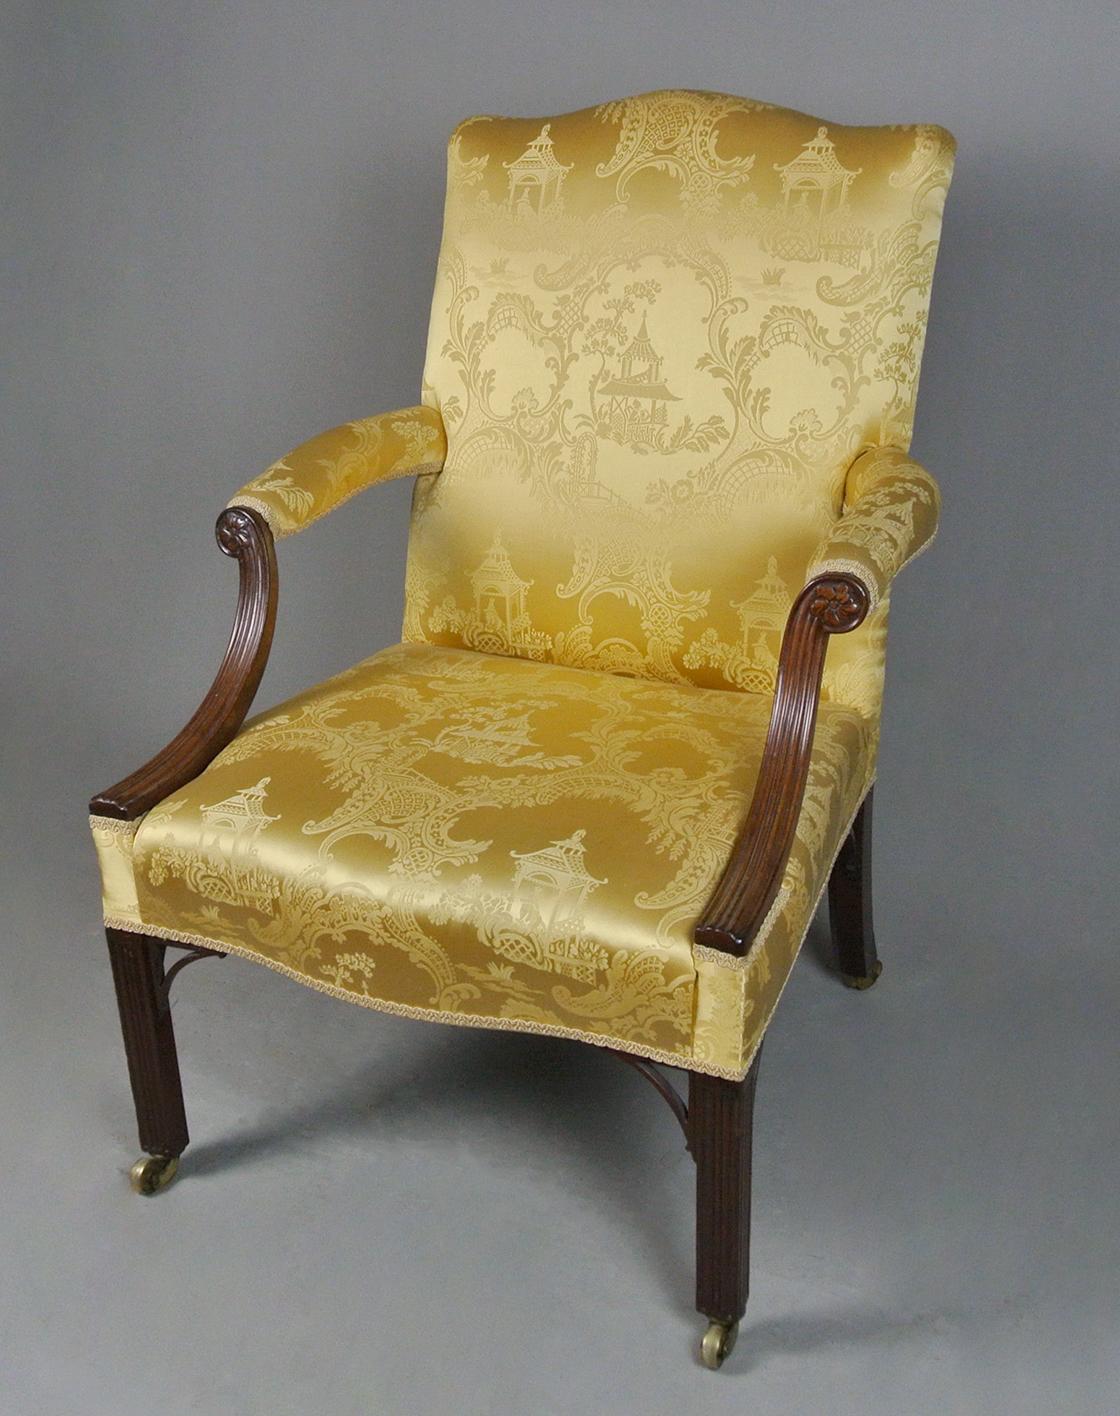 18th Century and Earlier Exceptional George III Mahogany Gainsborough Chair c. 1750